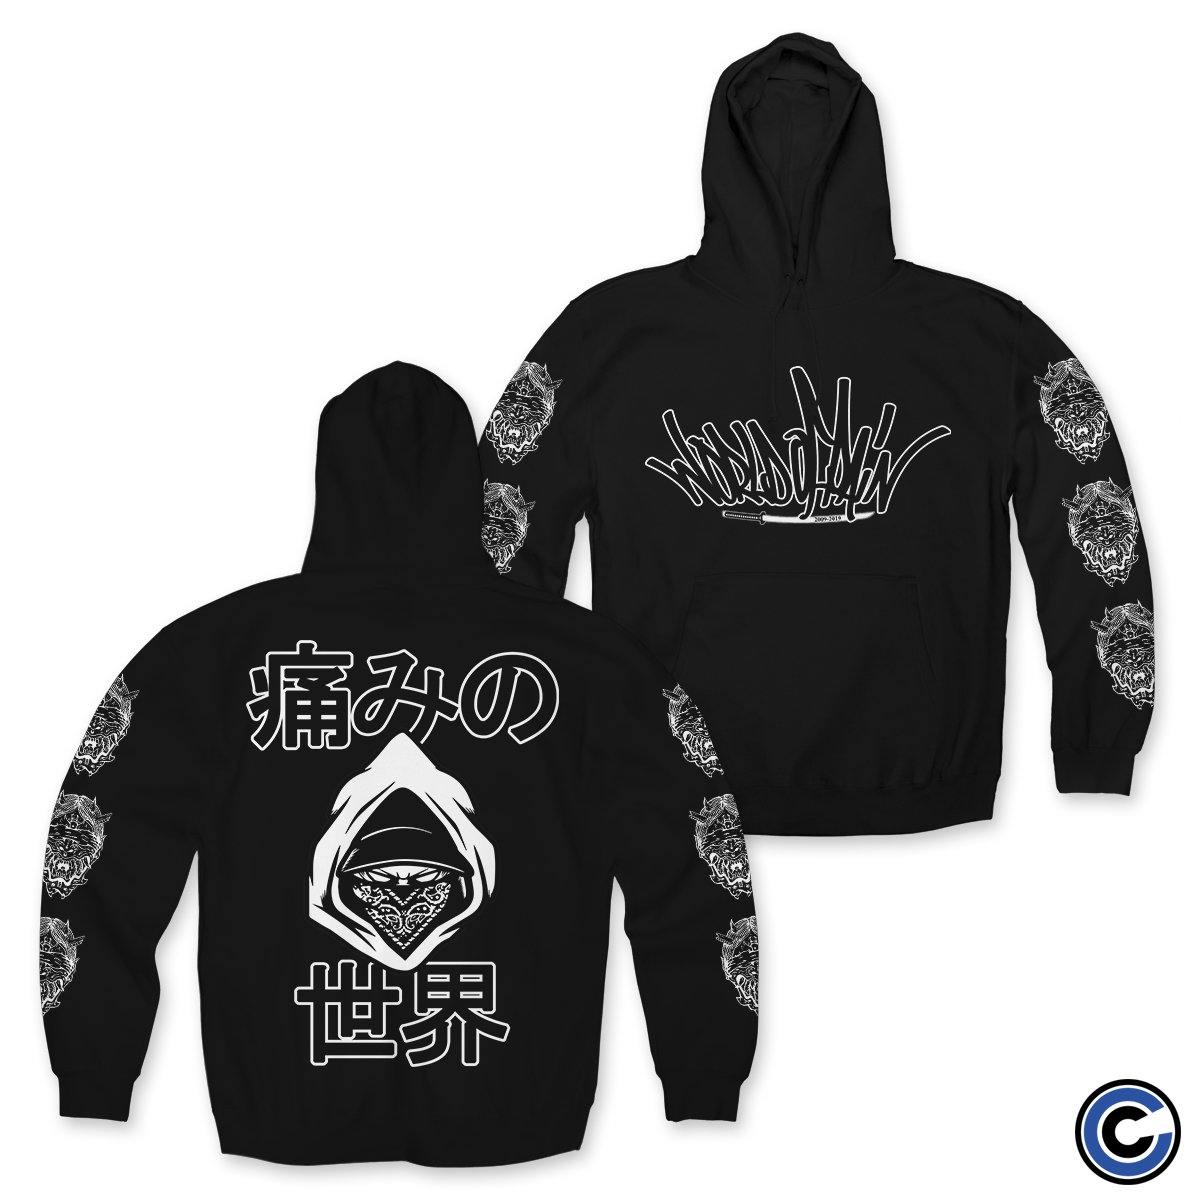 Buy – World of Pain "Japanese 19" Hoodie – Band & Music Merch – Cold Cuts Merch